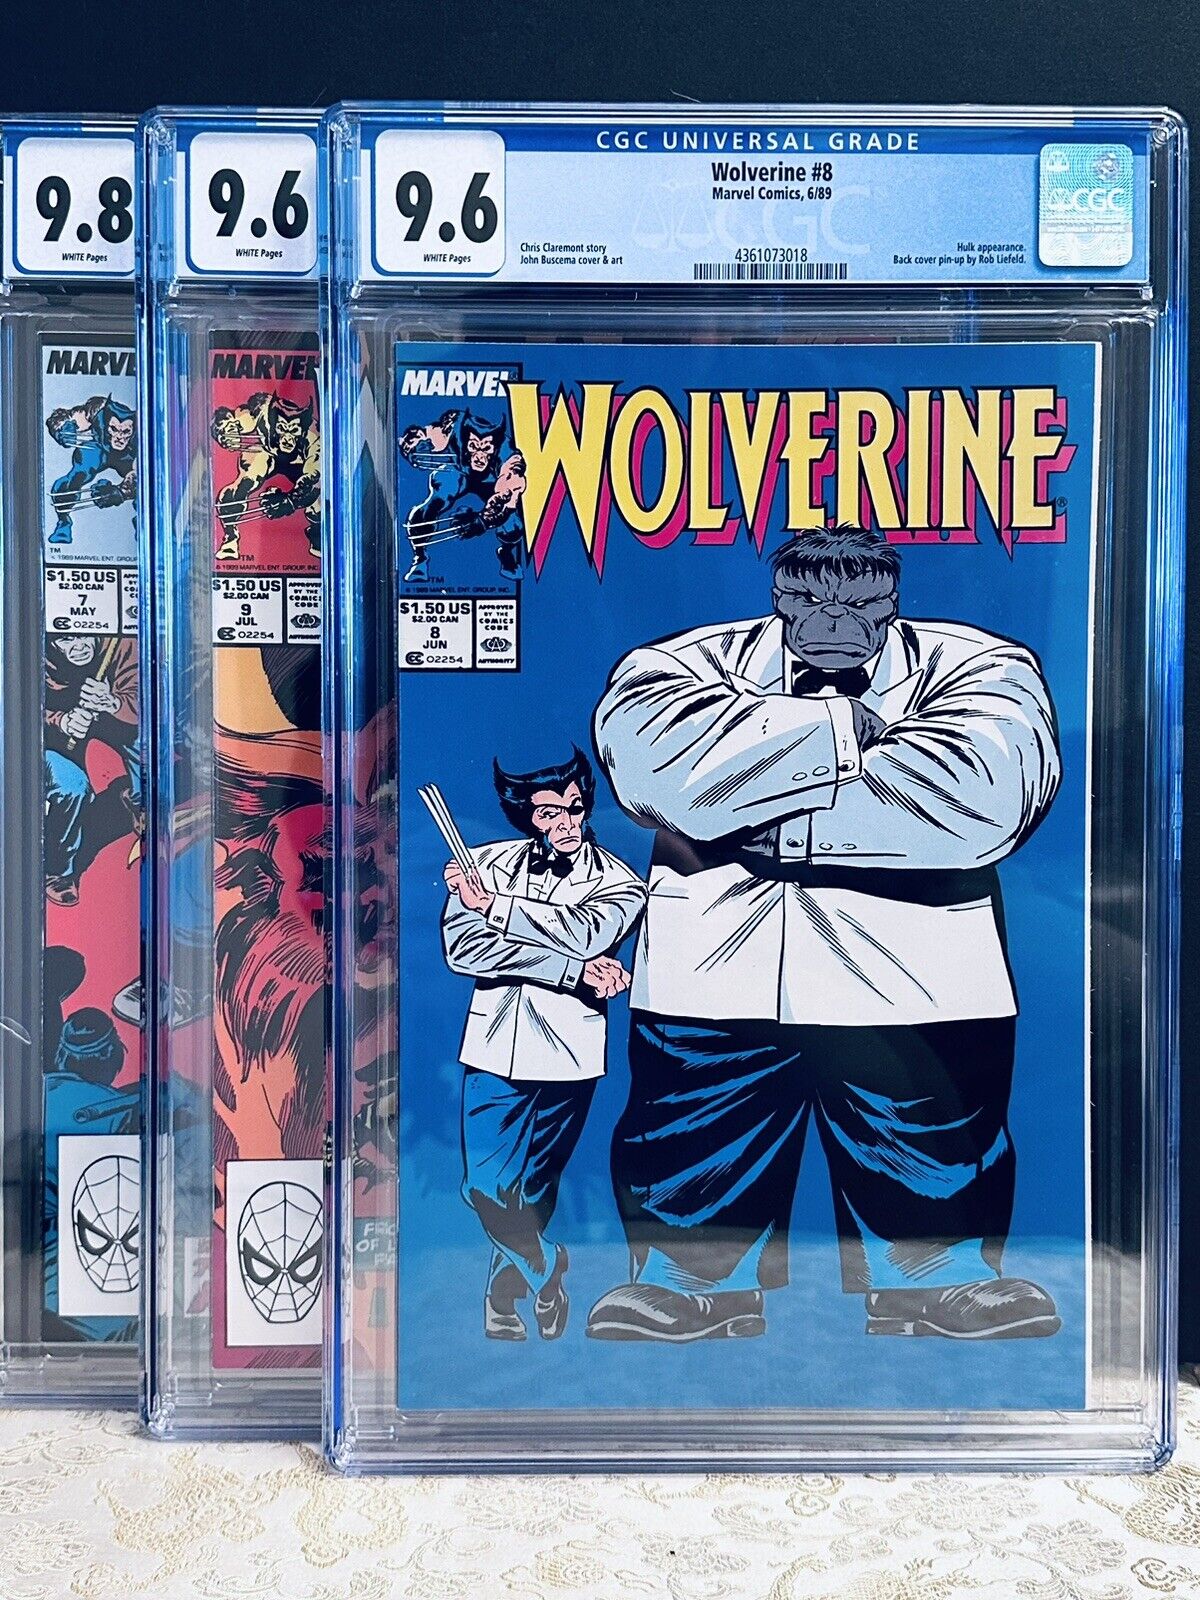 Wolverine #7 #8 #9 ALL THREE CGC 9.8 or 9.6 - please read description for this